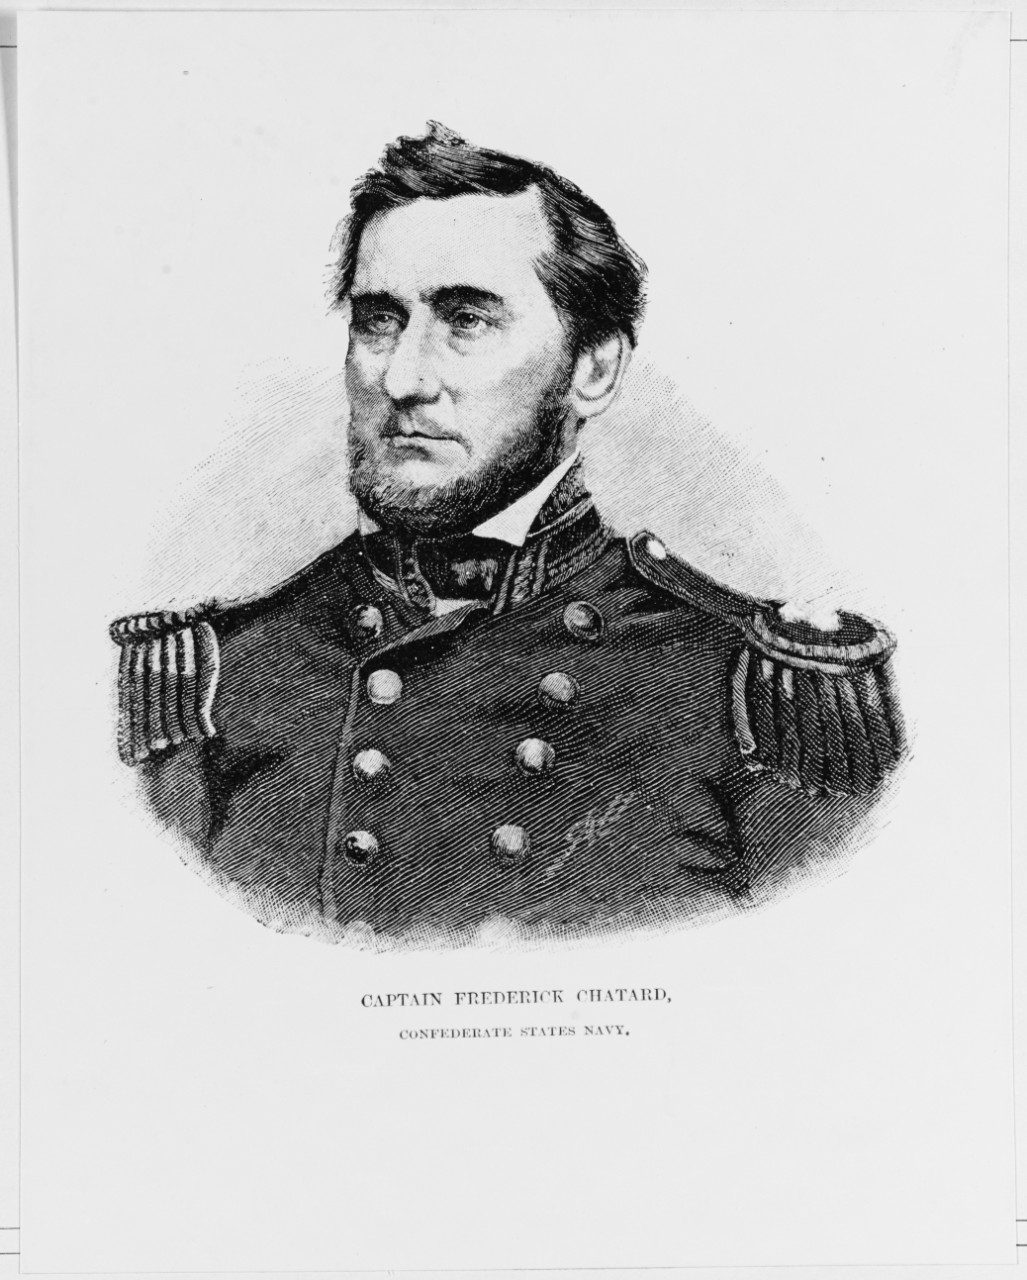 Captain Frederick Chatard, Confederate States Navy